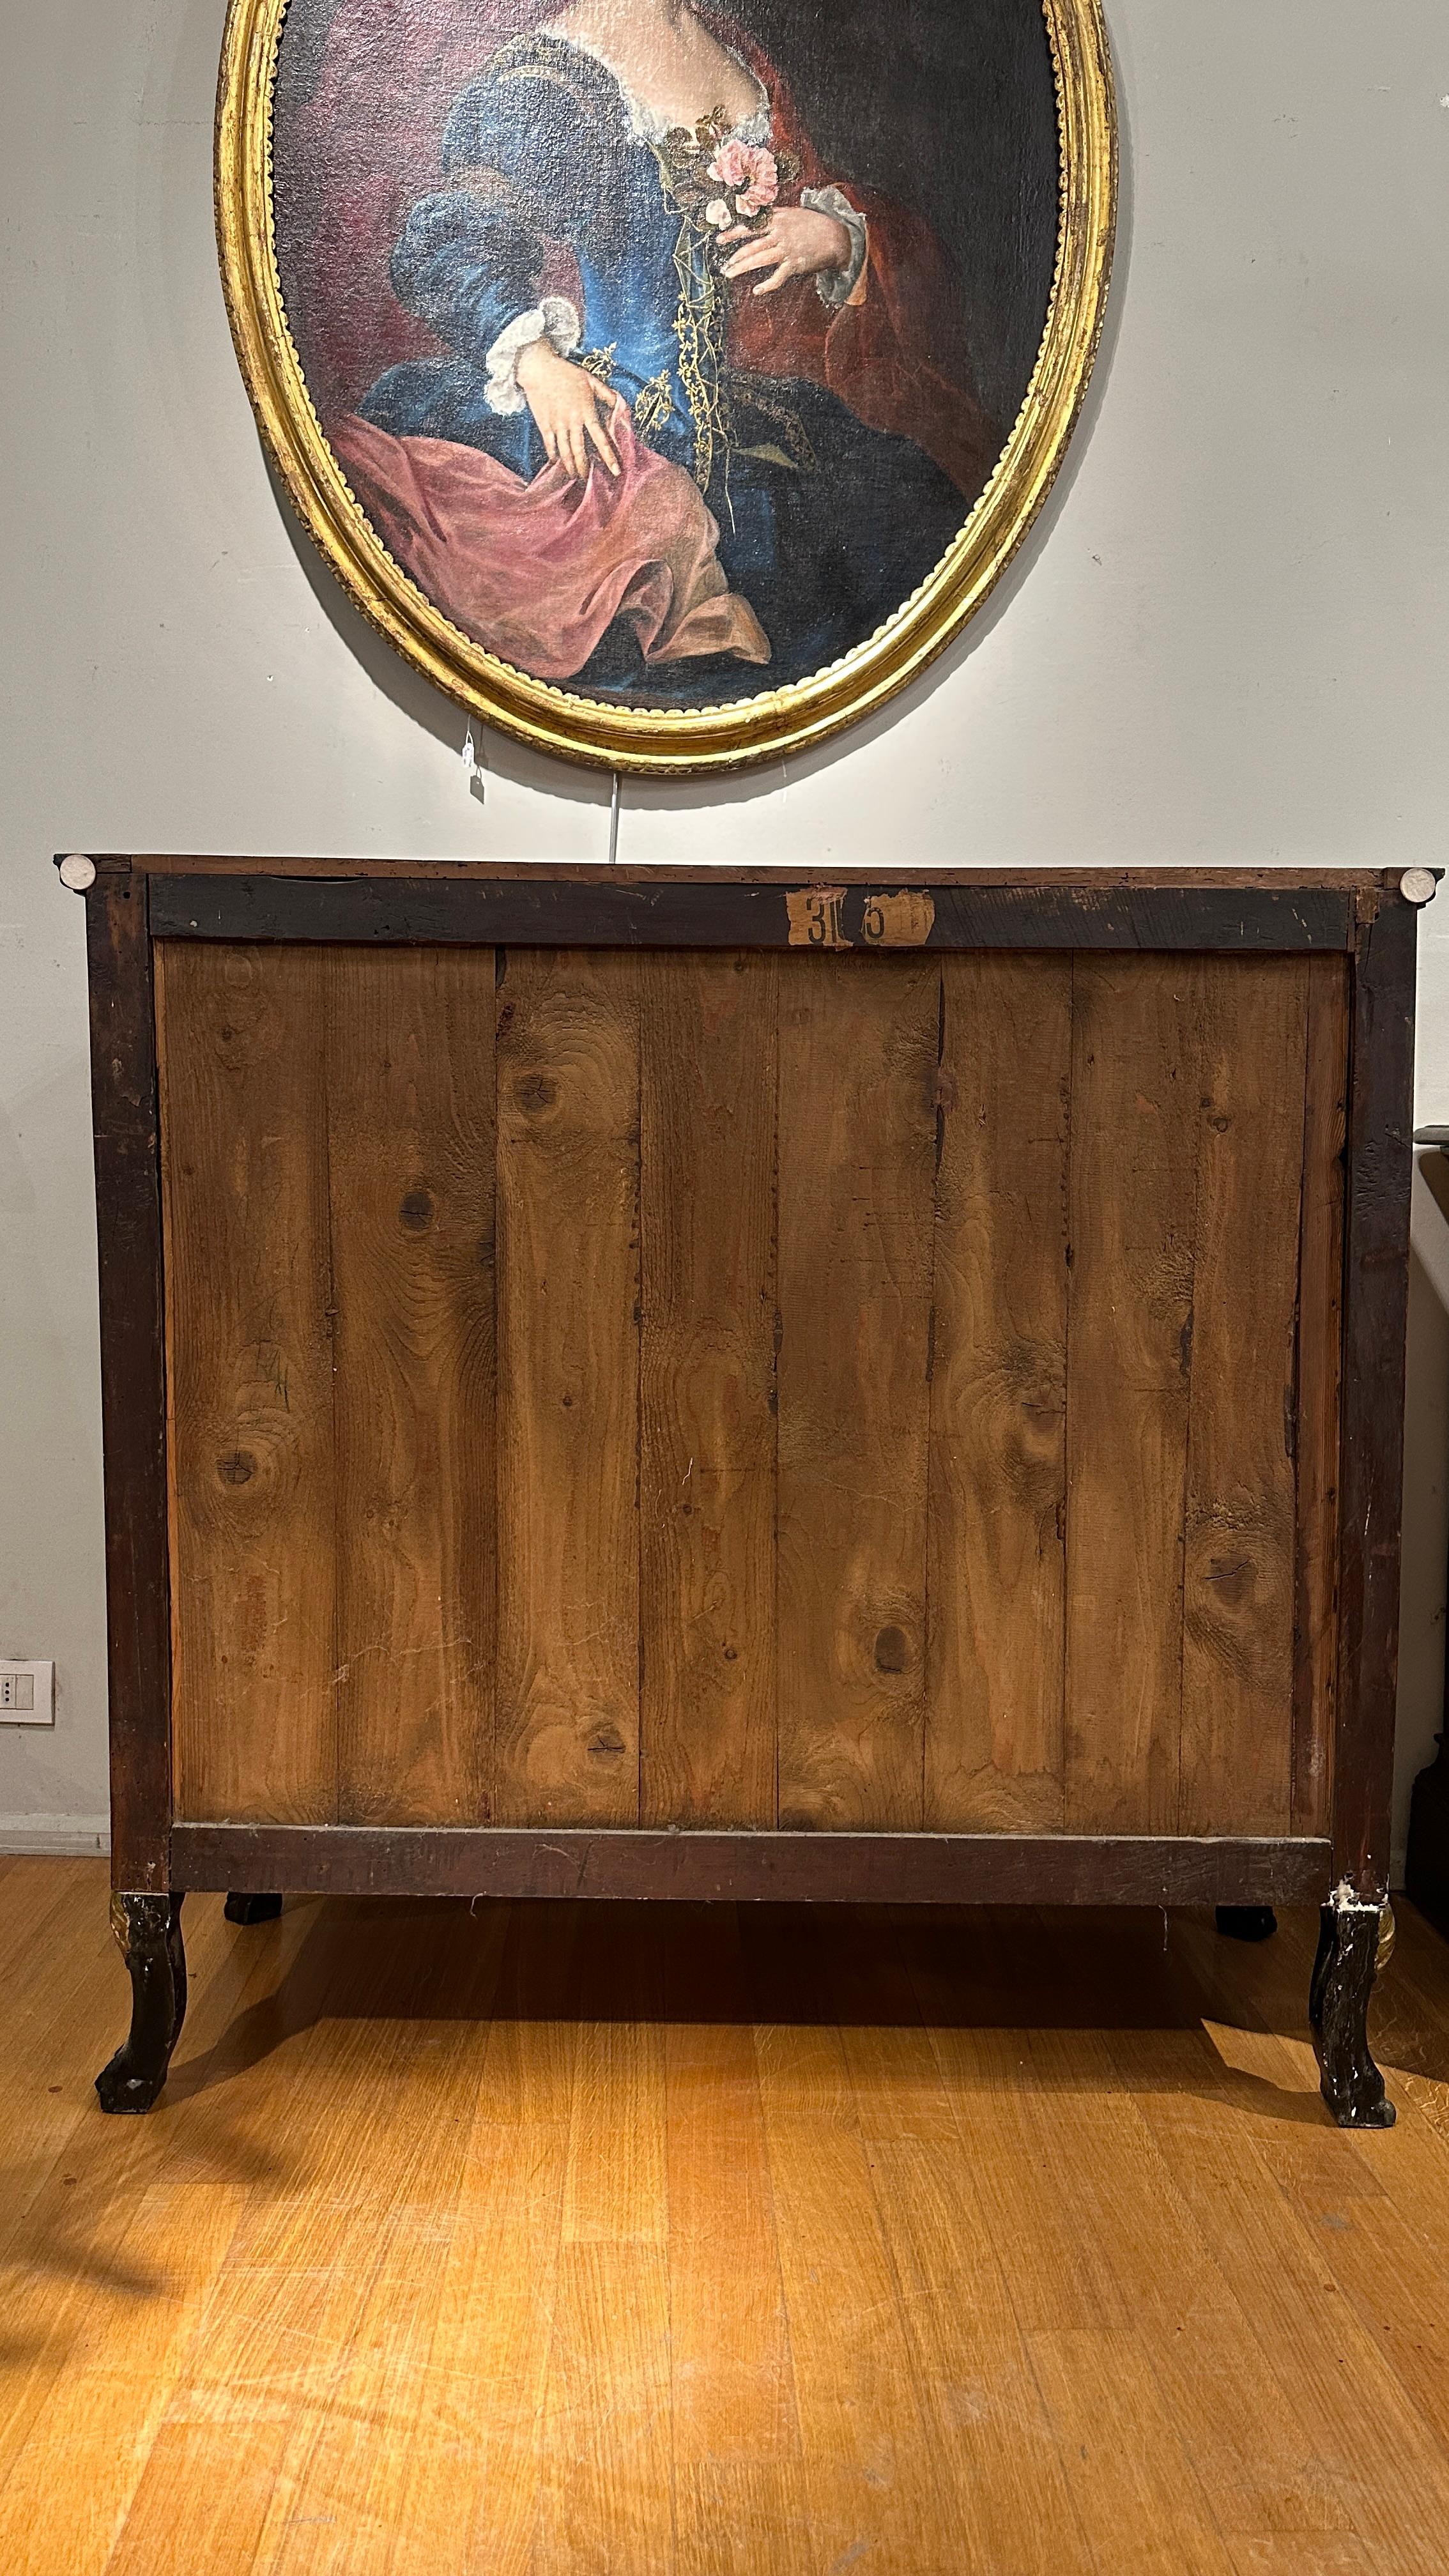 EARLY 19th CENTURY LUCHESE EMPIRE SIDEBOARD 1